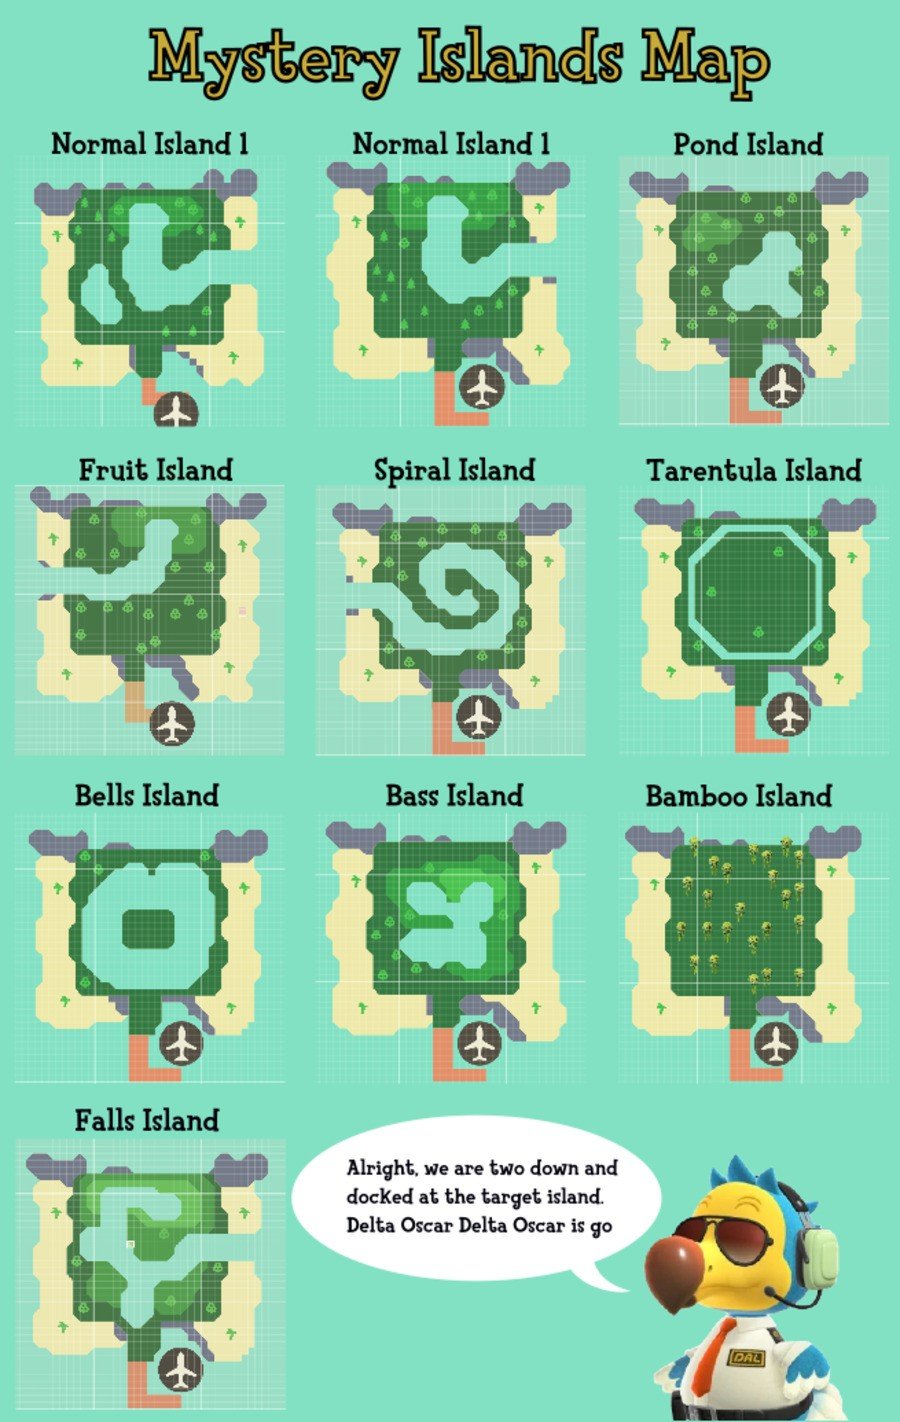 Missionaris Gelijkwaardig oor Animal Crossing: New Horizons: Nook Miles Ticket Mystery Island Tours - How  To Visit Other Islands And Mystery Island Types Explained | Nintendo Life